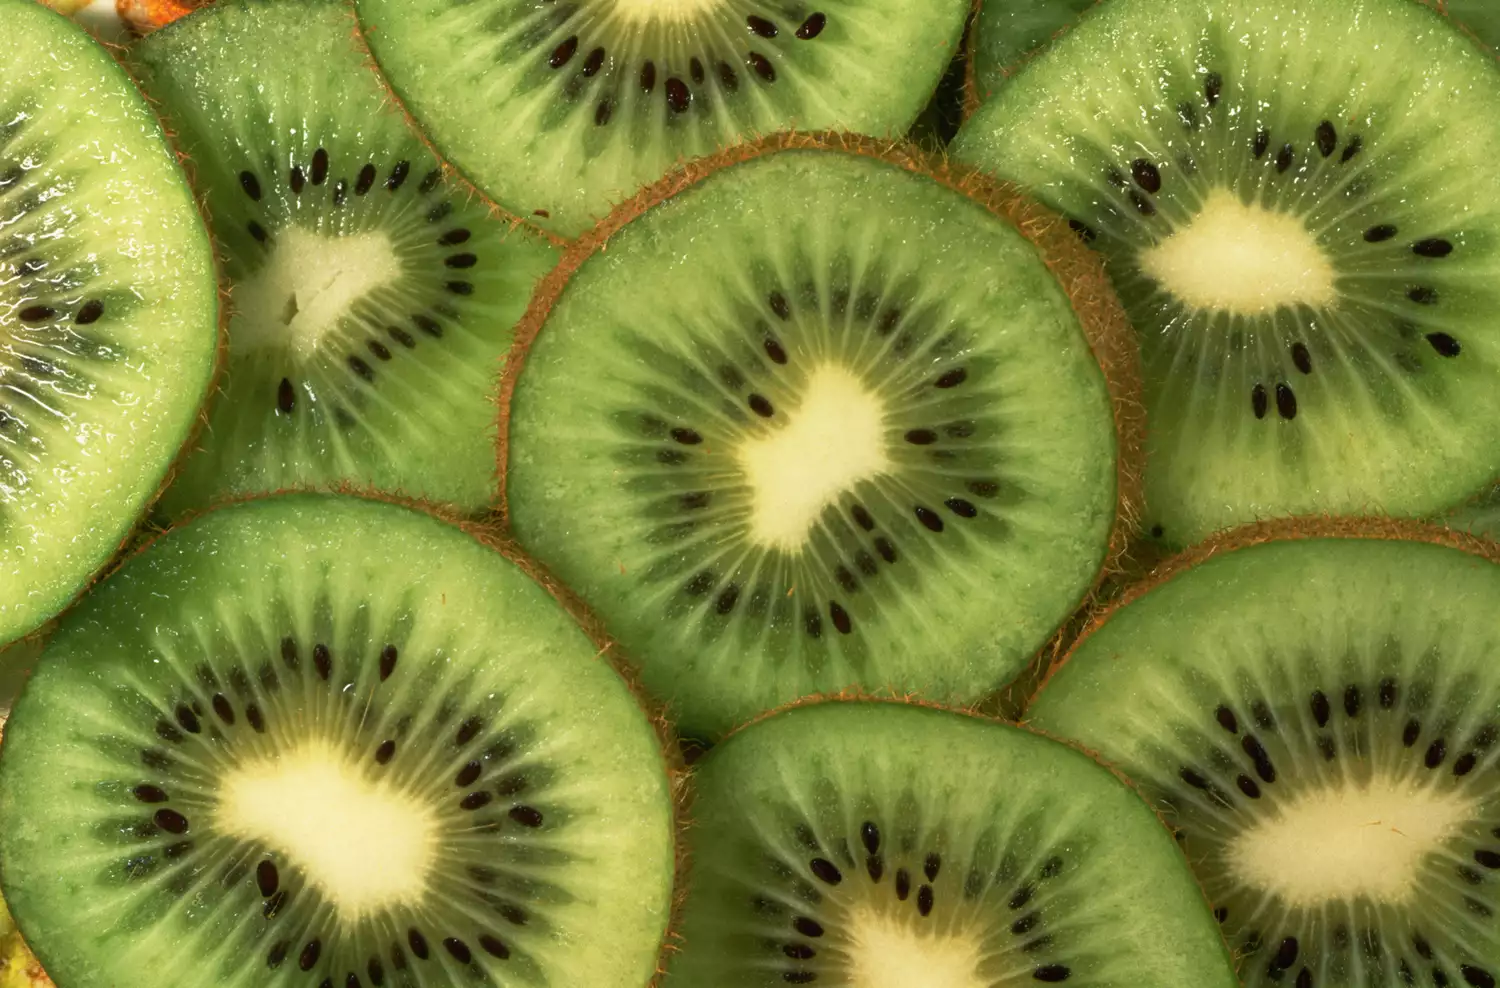 close-up of sliced kiwi fruit, layered on top of one another to fill the frame.